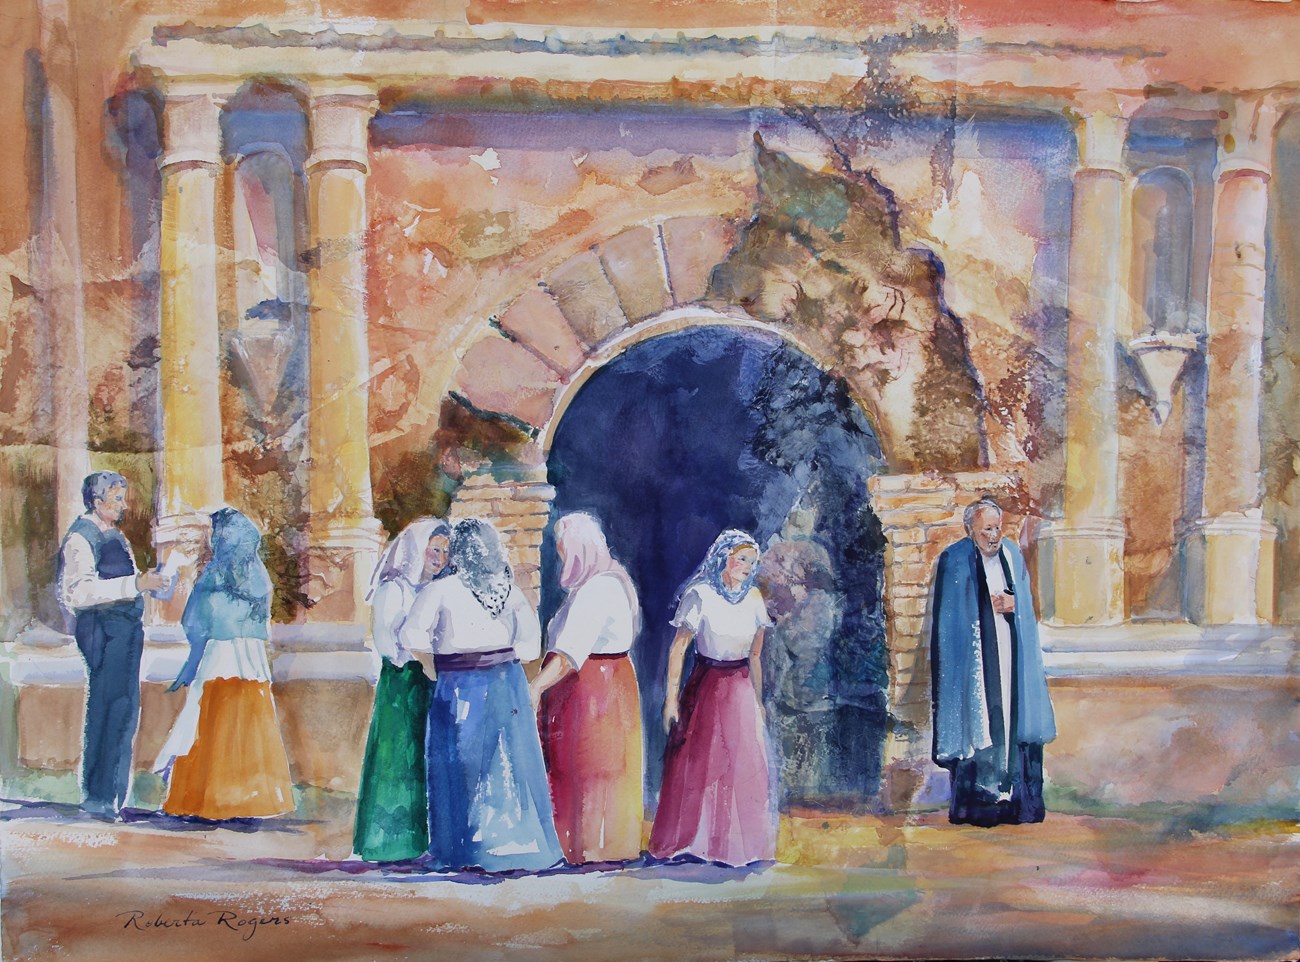 Watercolor painting of people in historical costume in front of adobe church.